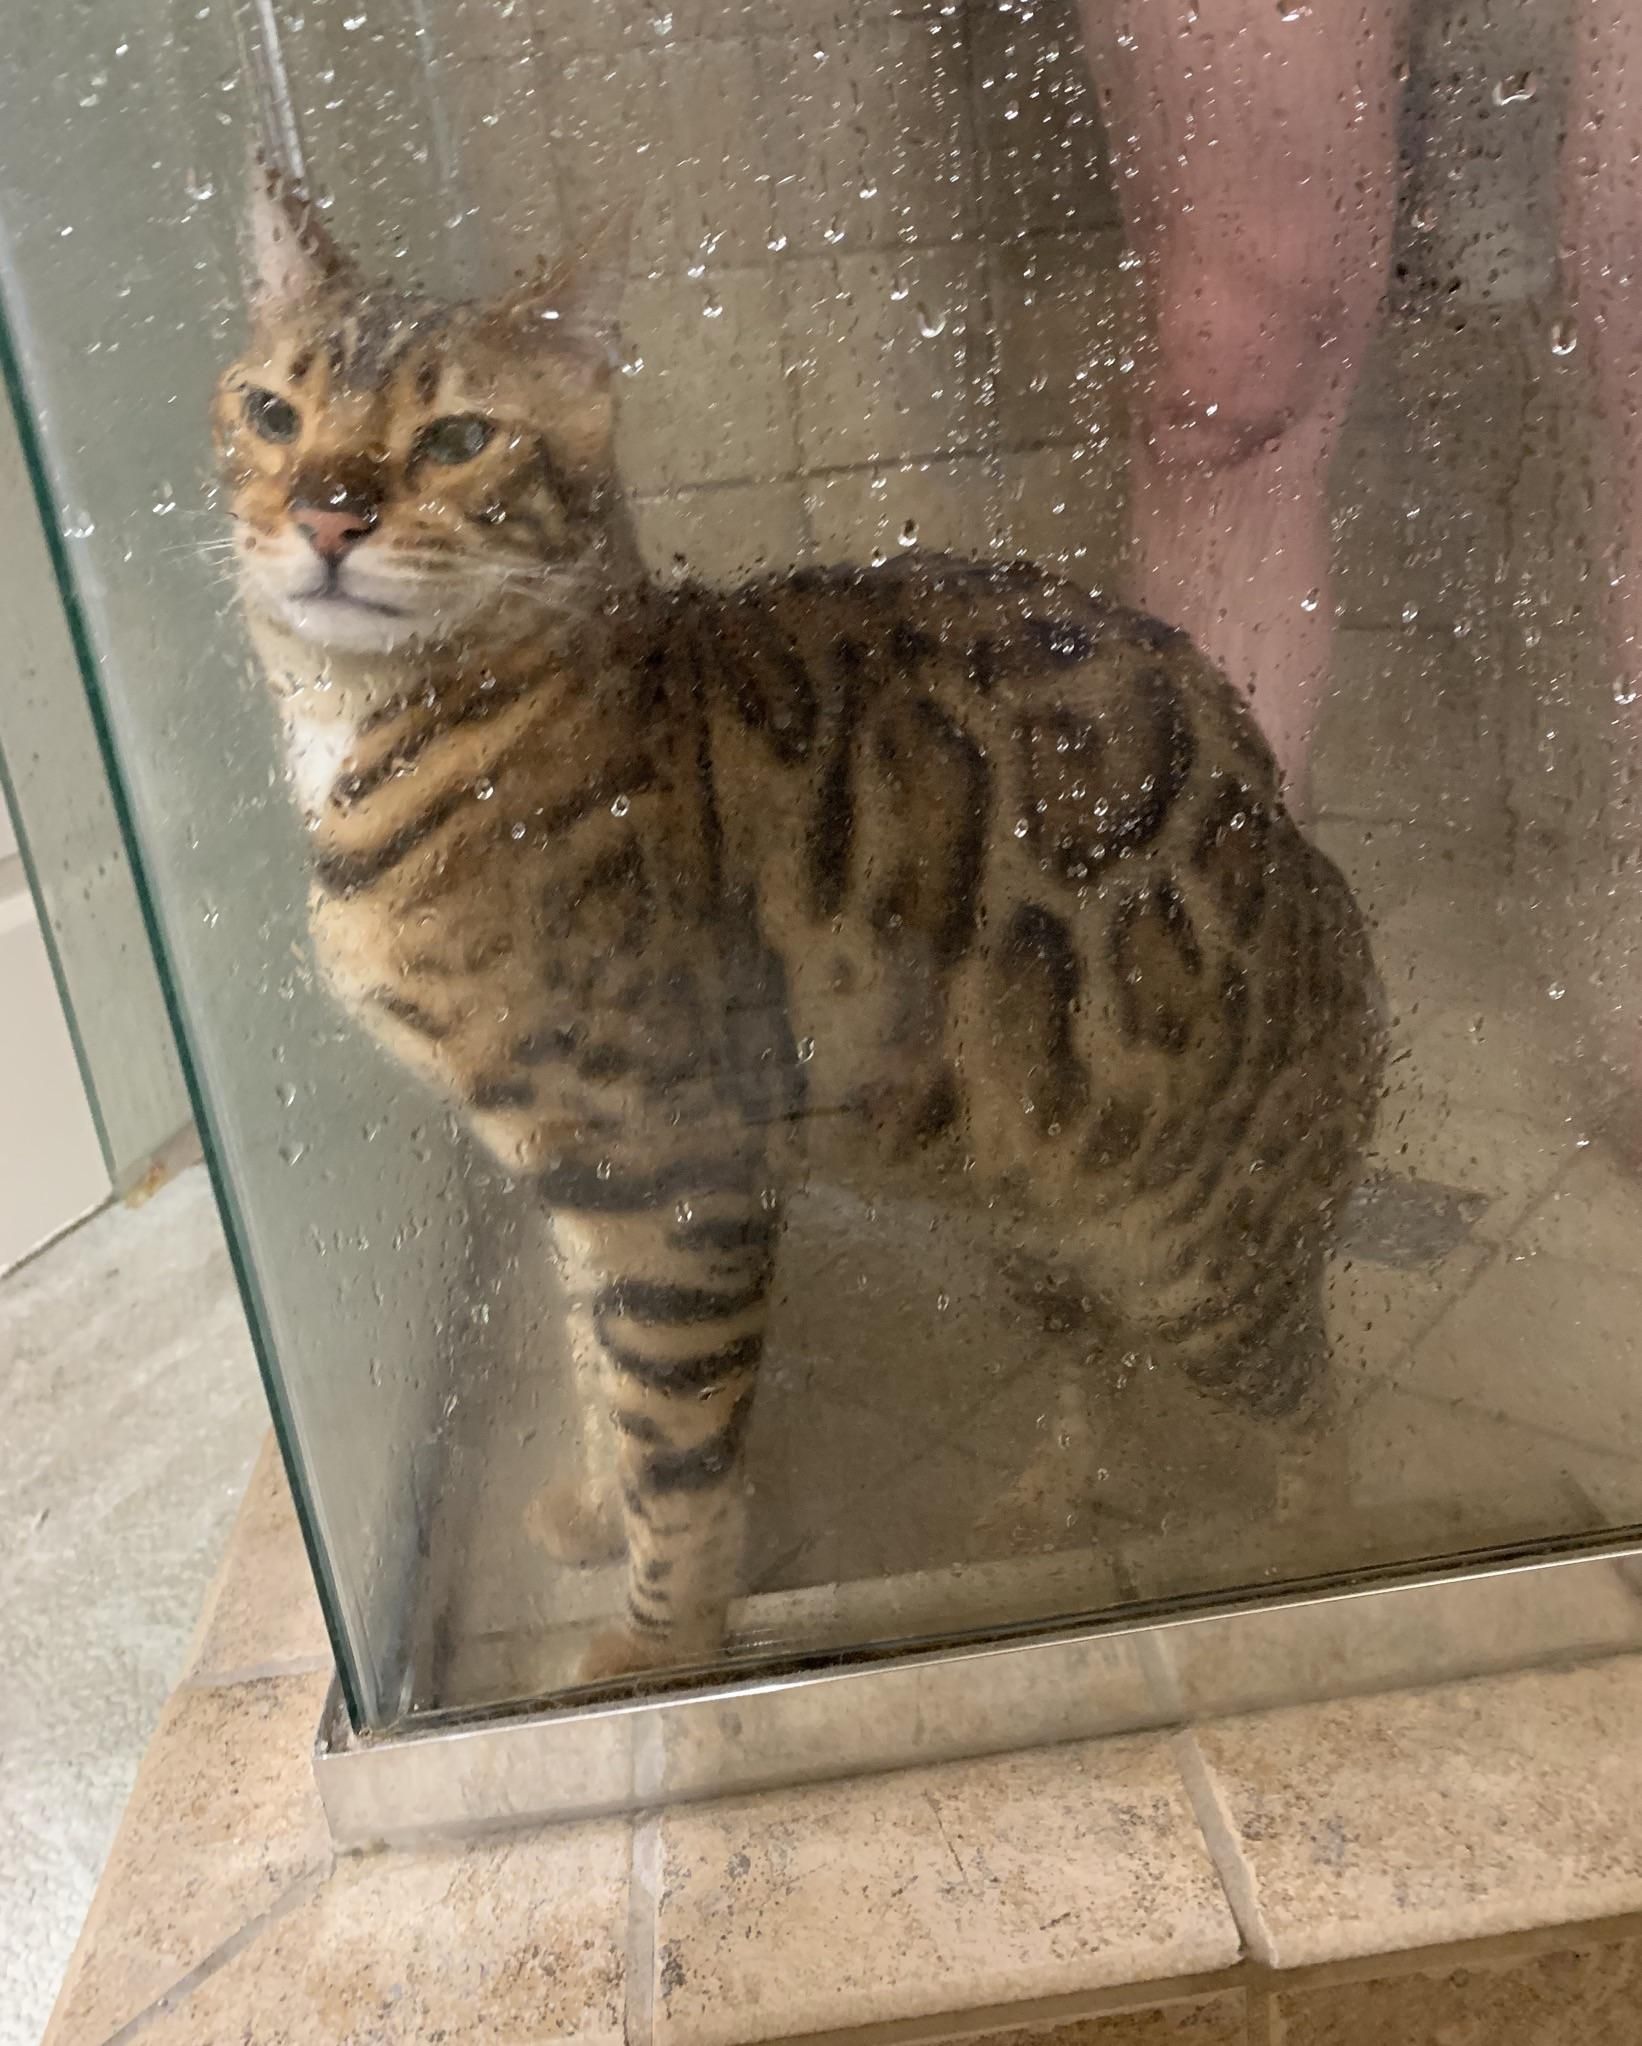 My cat usually showers with me but decided to hop in with my fiancé this morning instead. Some things can’t be unseen.